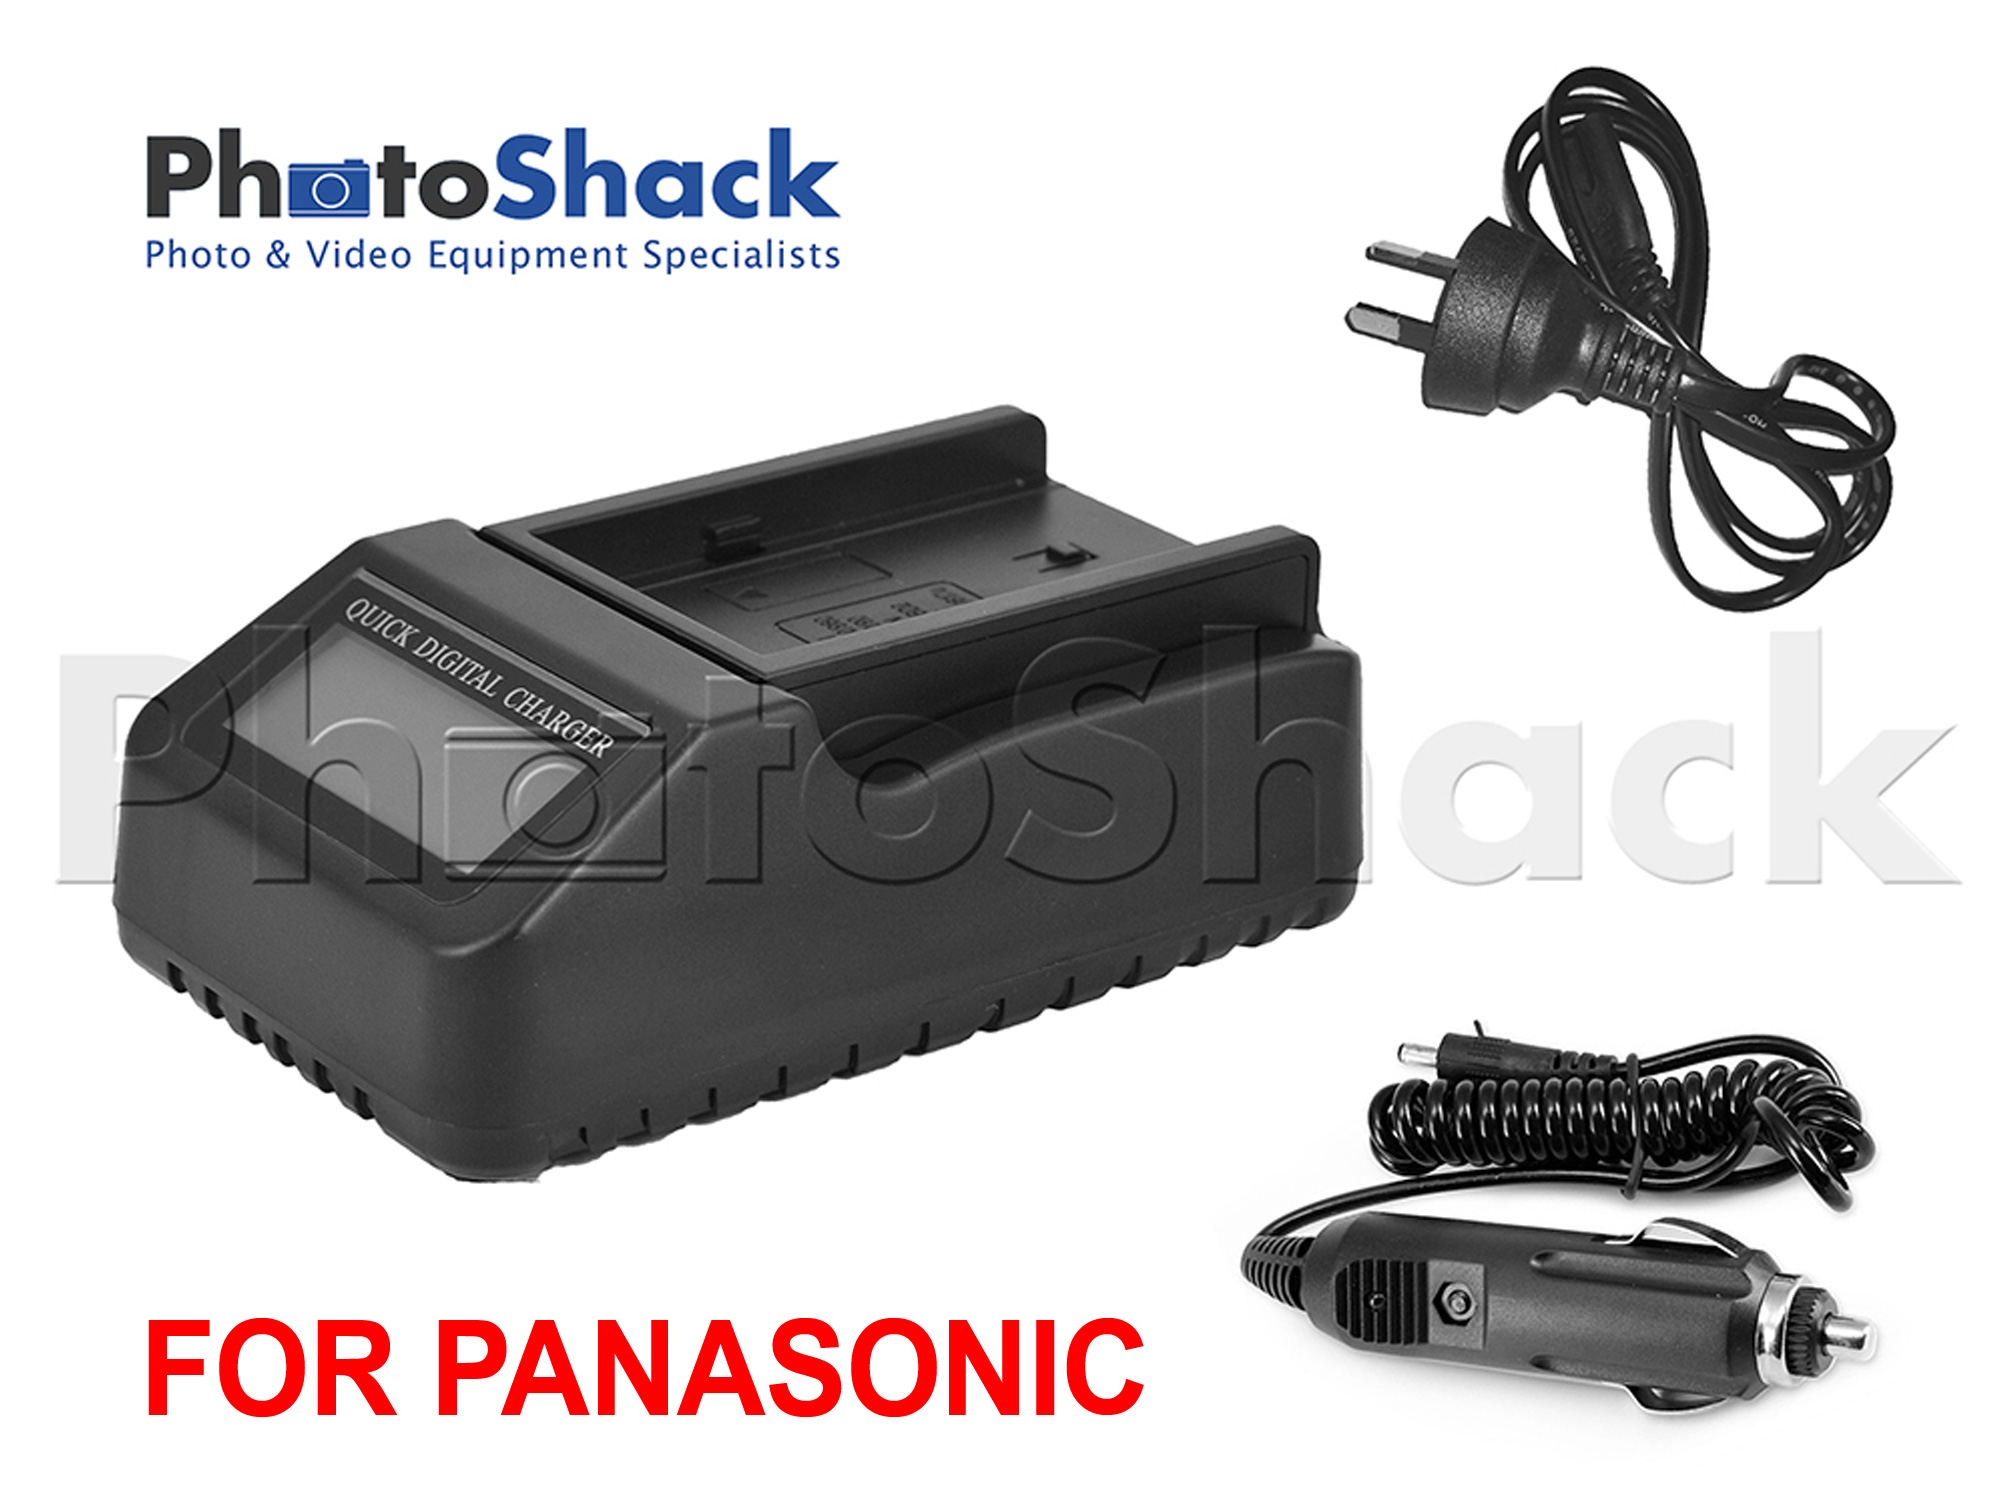 Multifunction Digital Charger with LCD Display For Panasonic